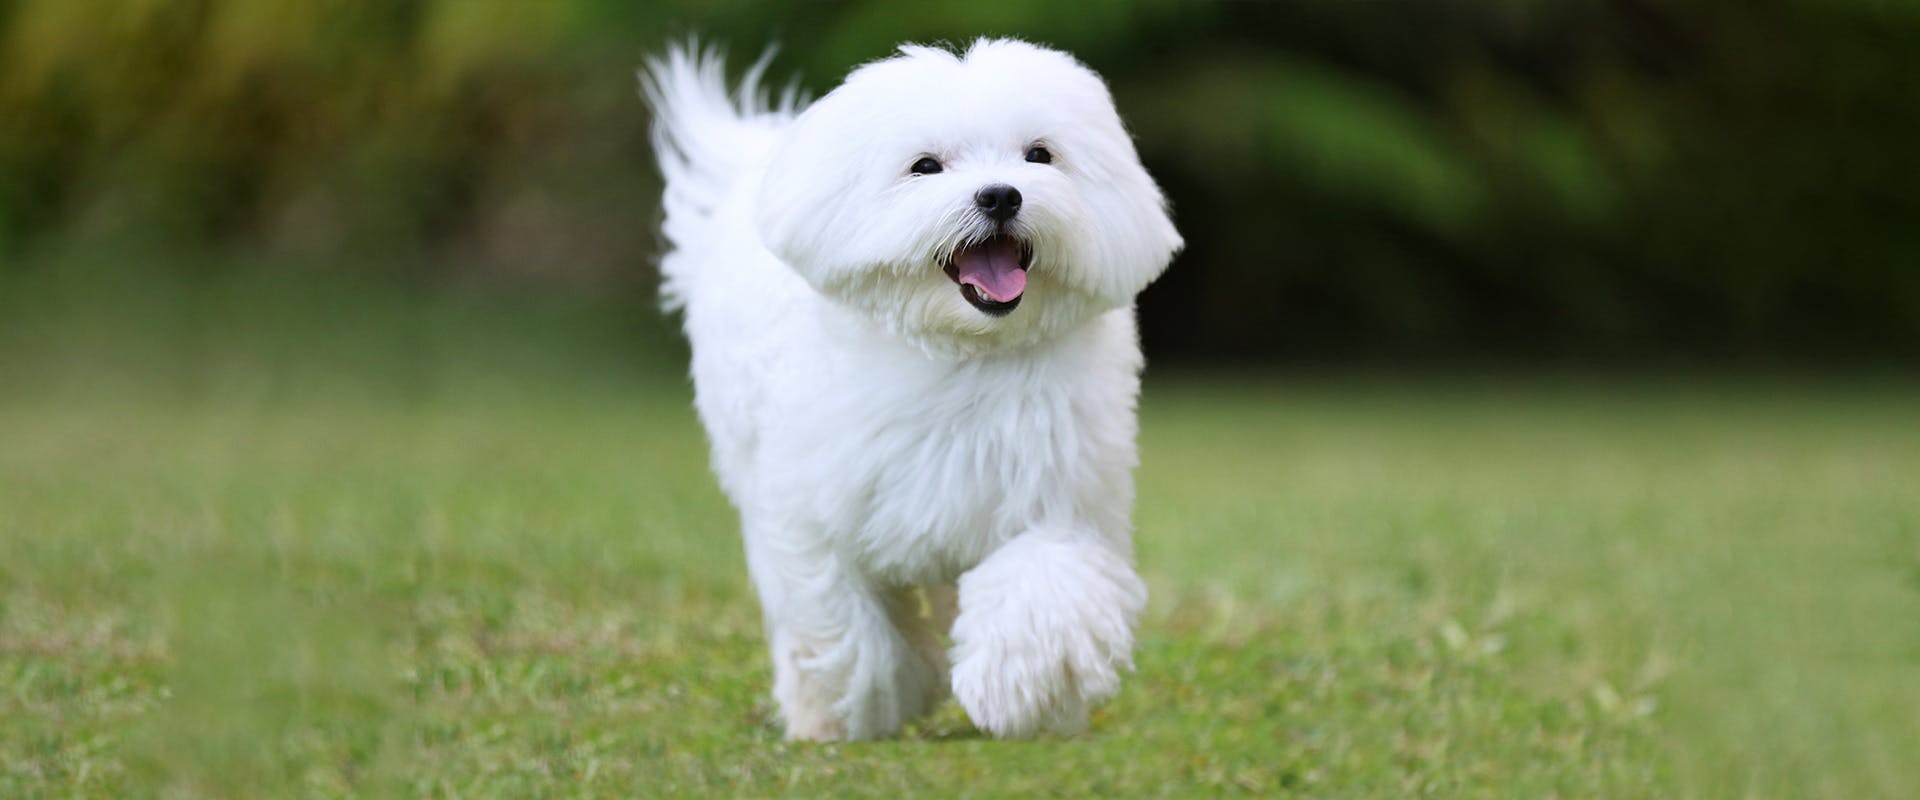 A happy looking Maltese dog running through some grass